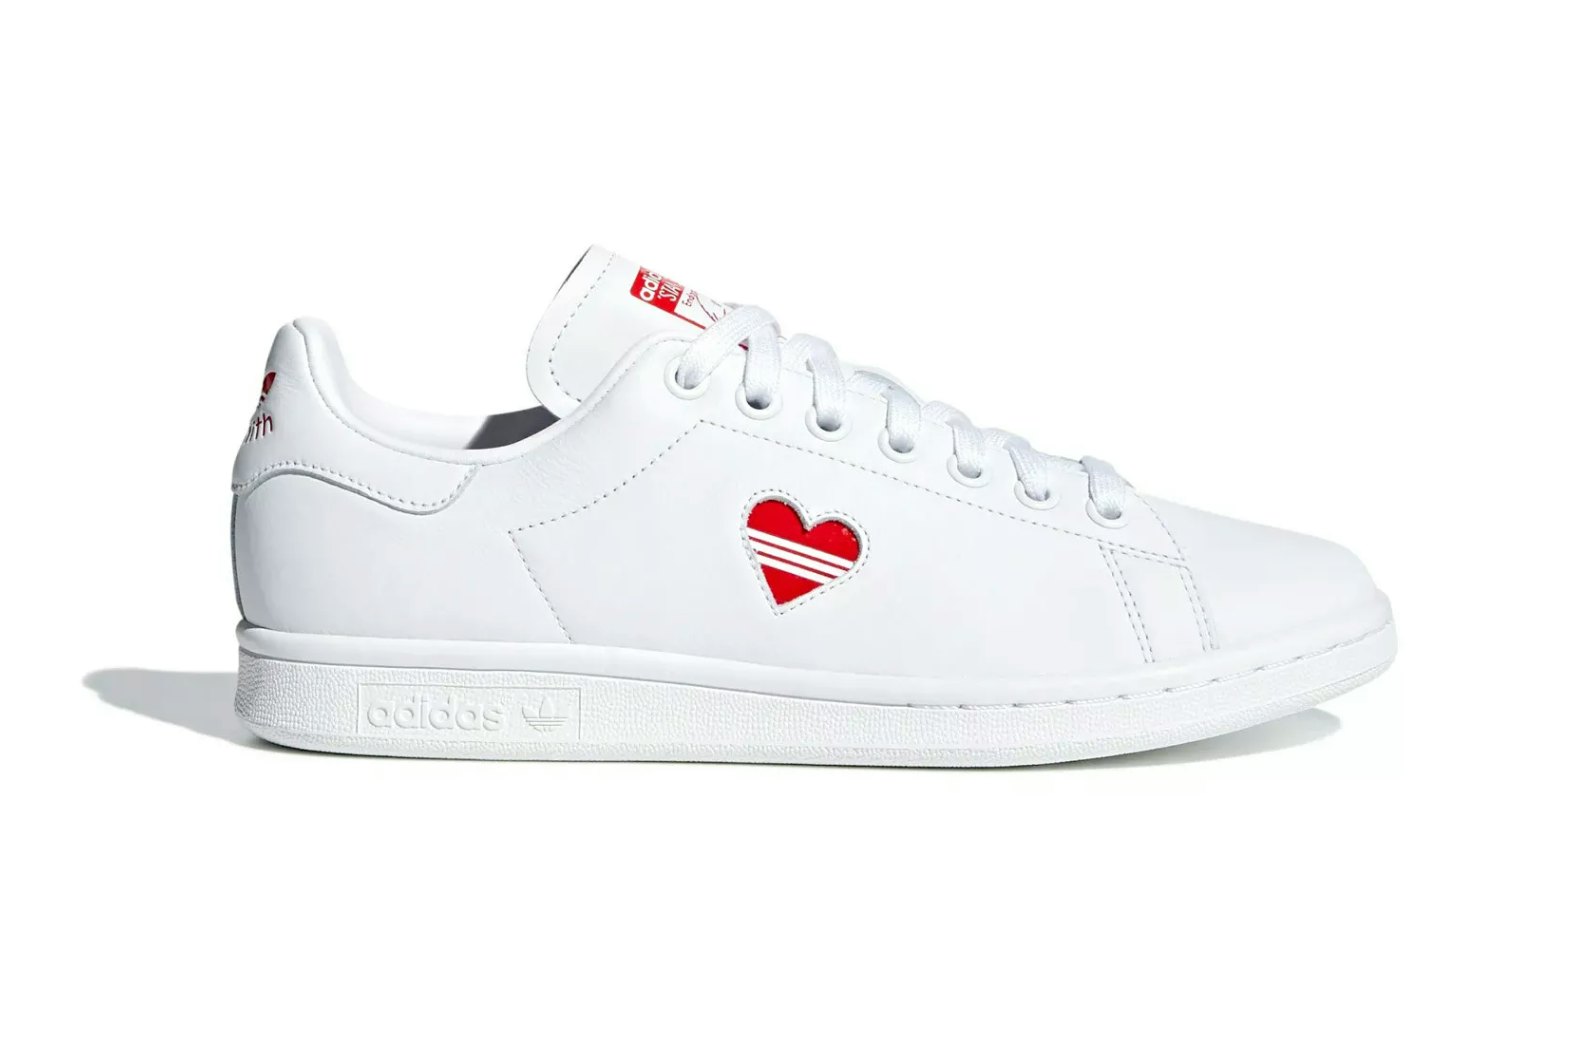 stan smith shoes heart